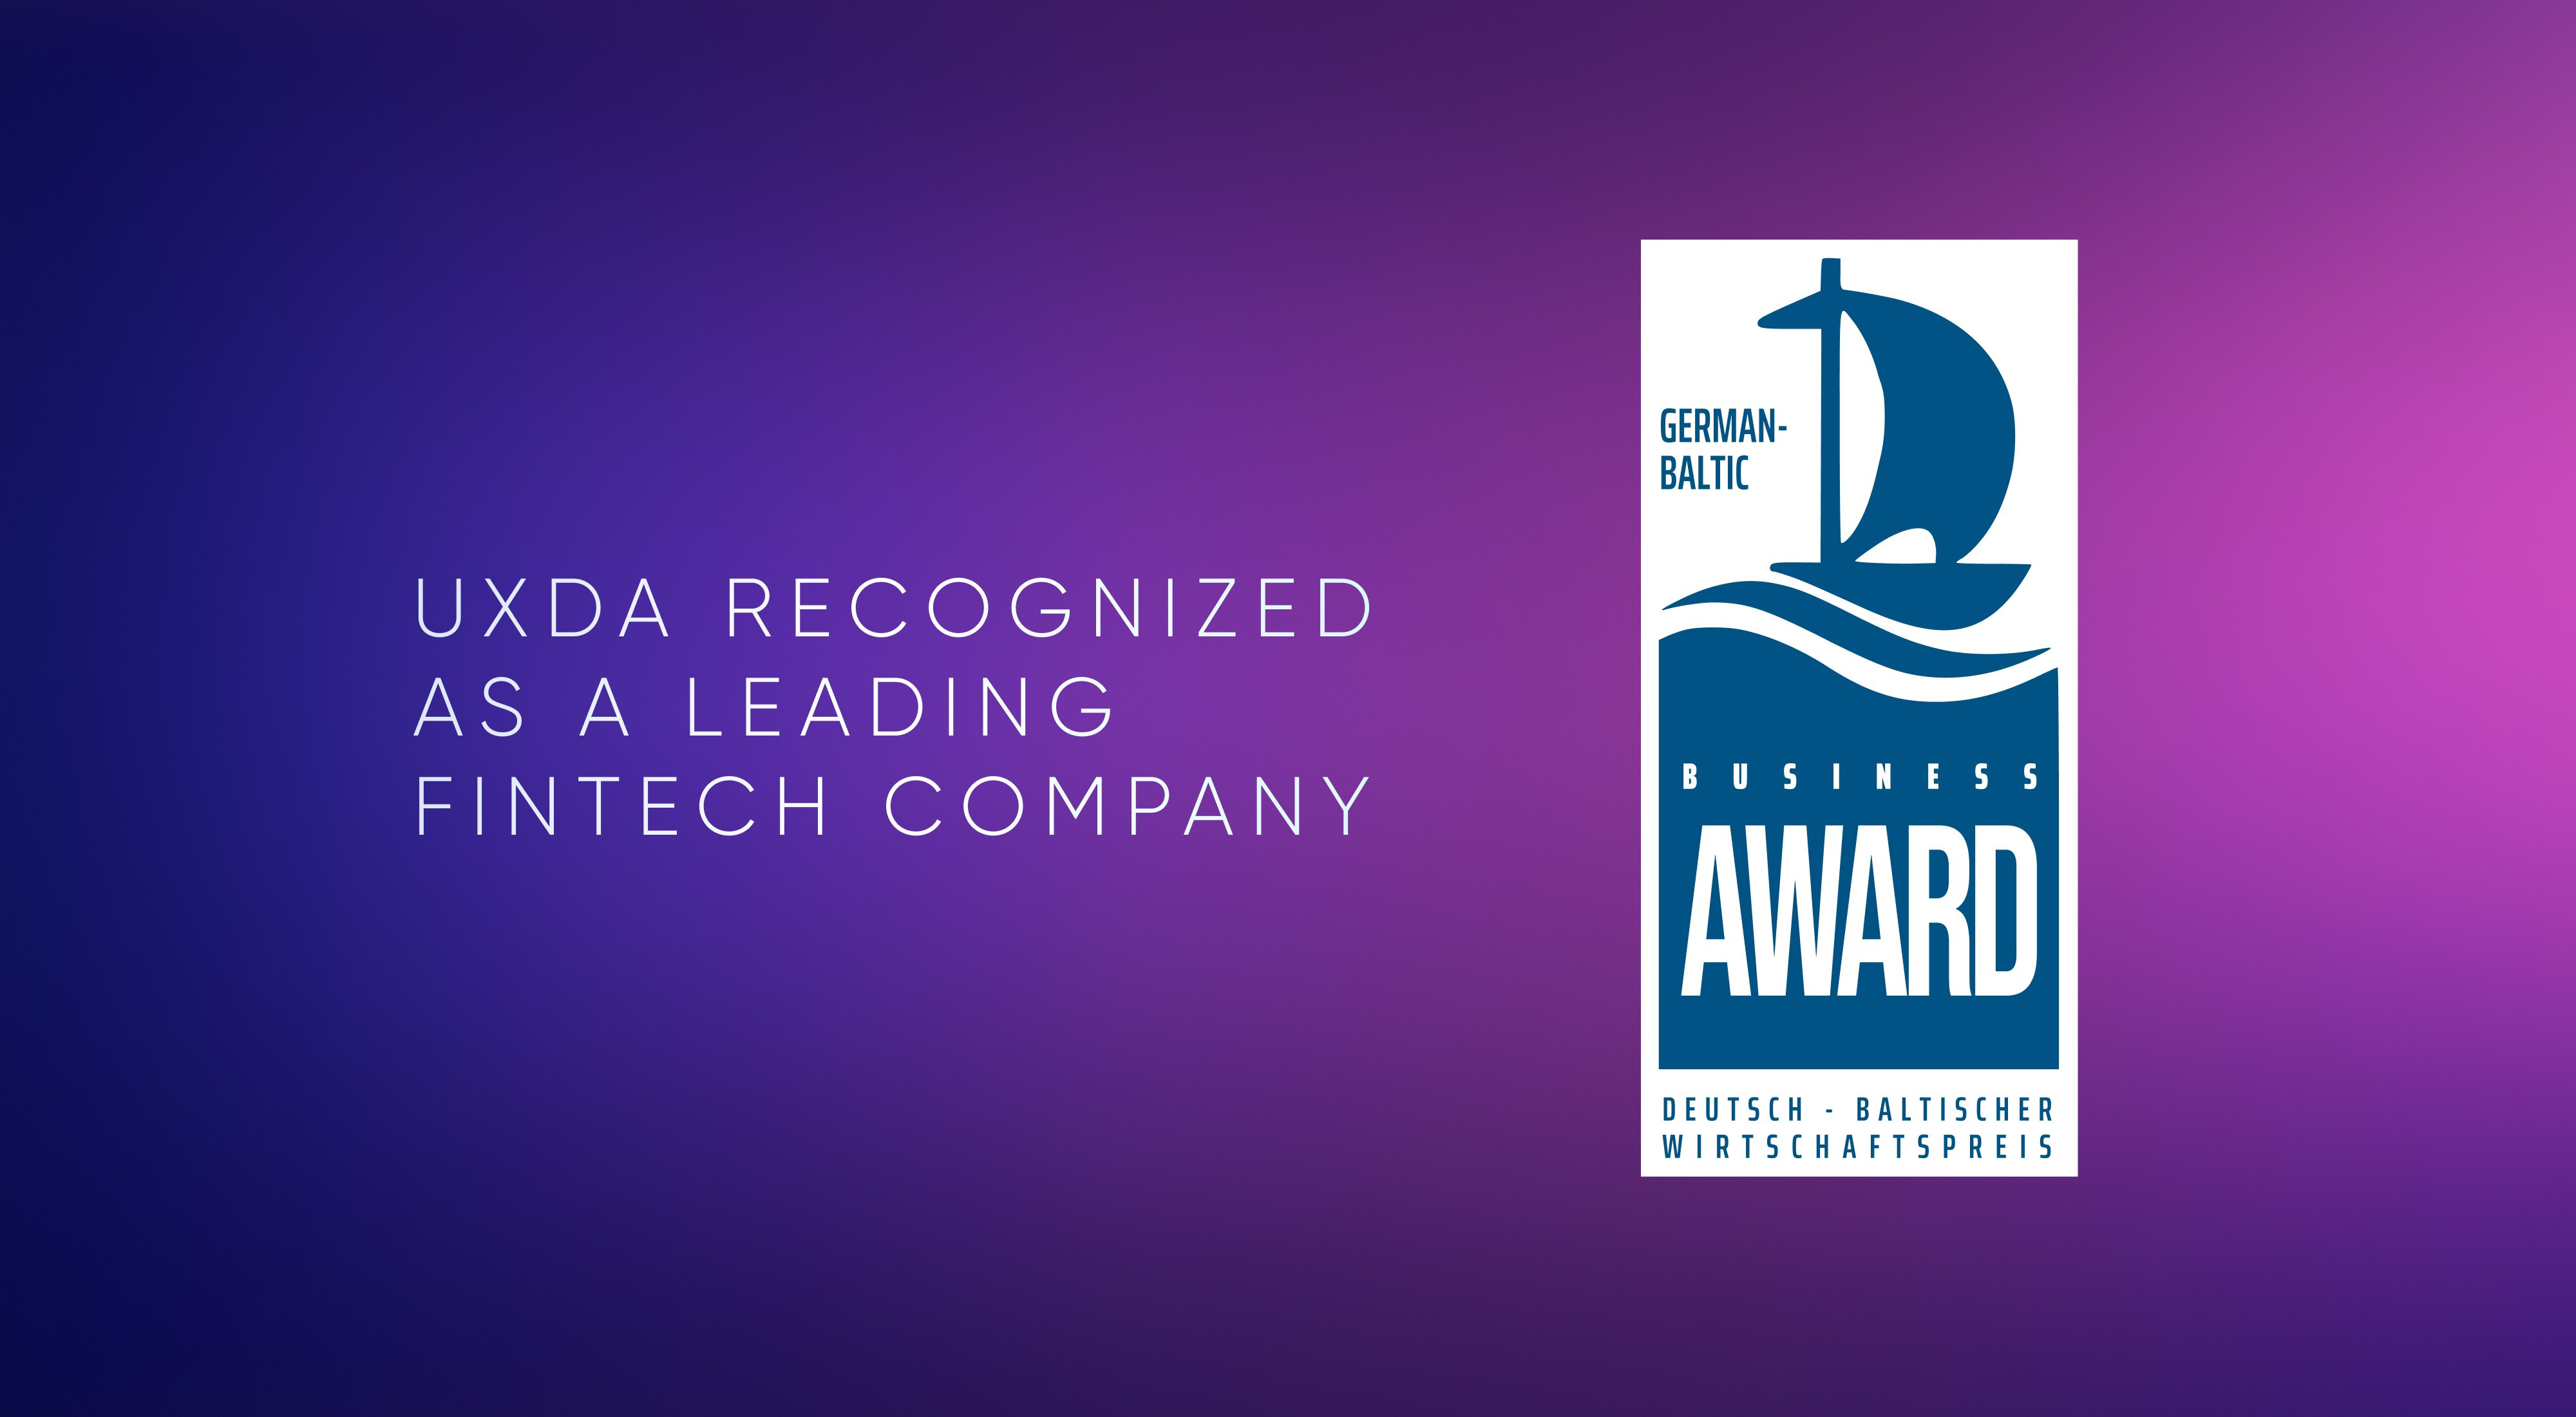 UXDA Is One Of The Leading FinTech Companies In German-Baltic Business Awards